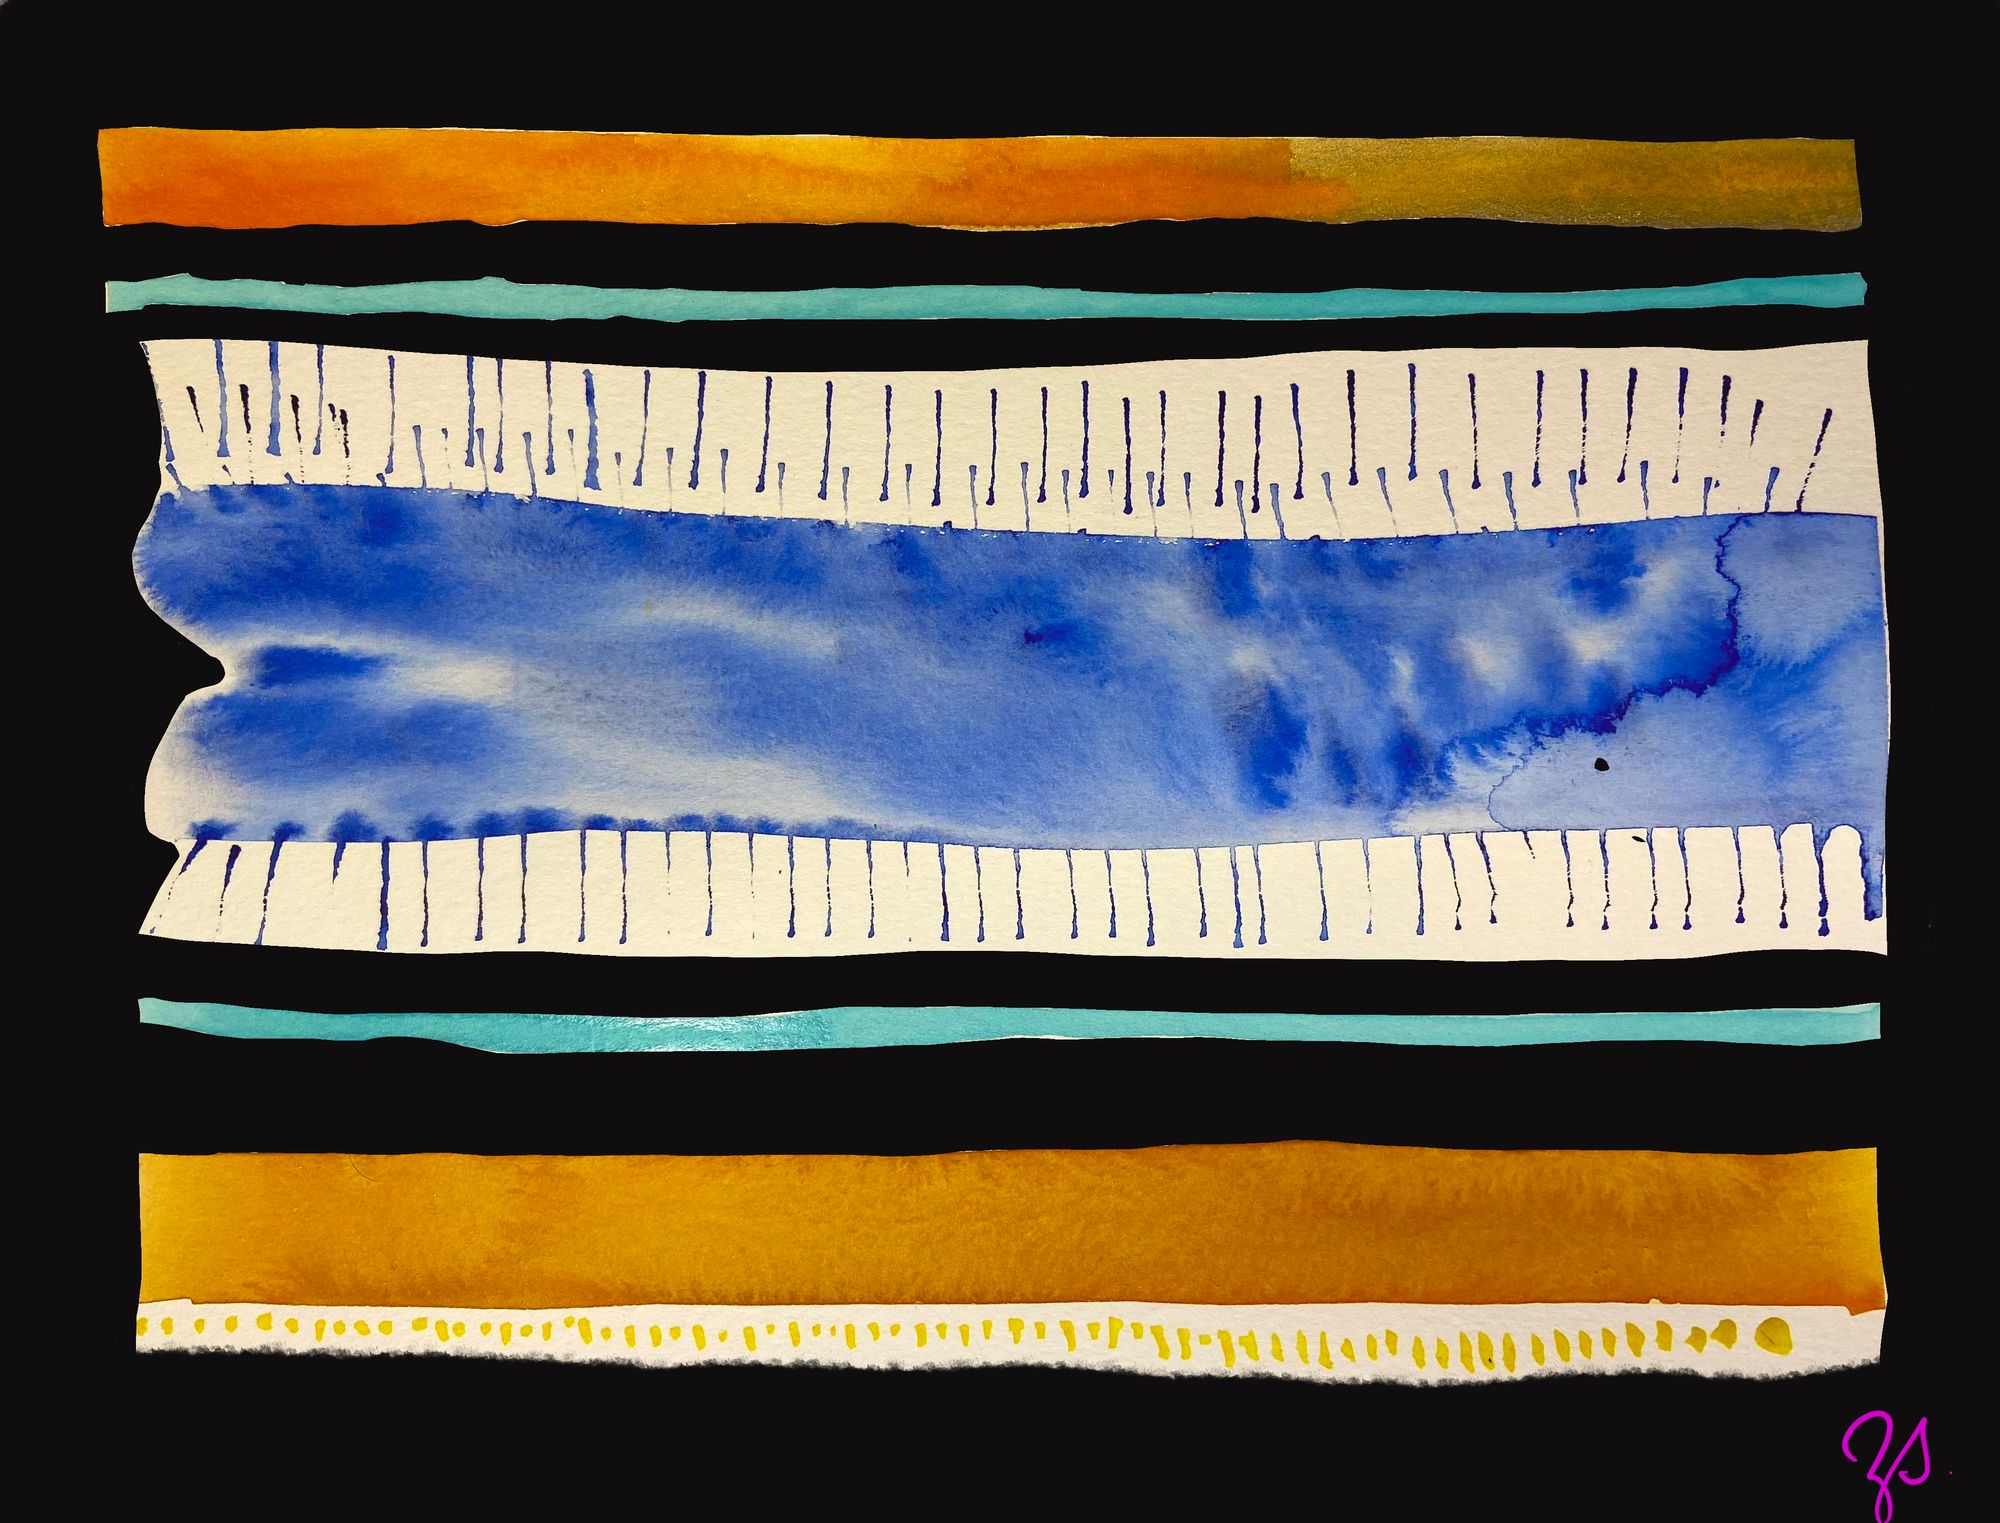 watercolour painted horizontal stripes of different colours and sizes on a black background. In the centre are thin blue vertical lines.